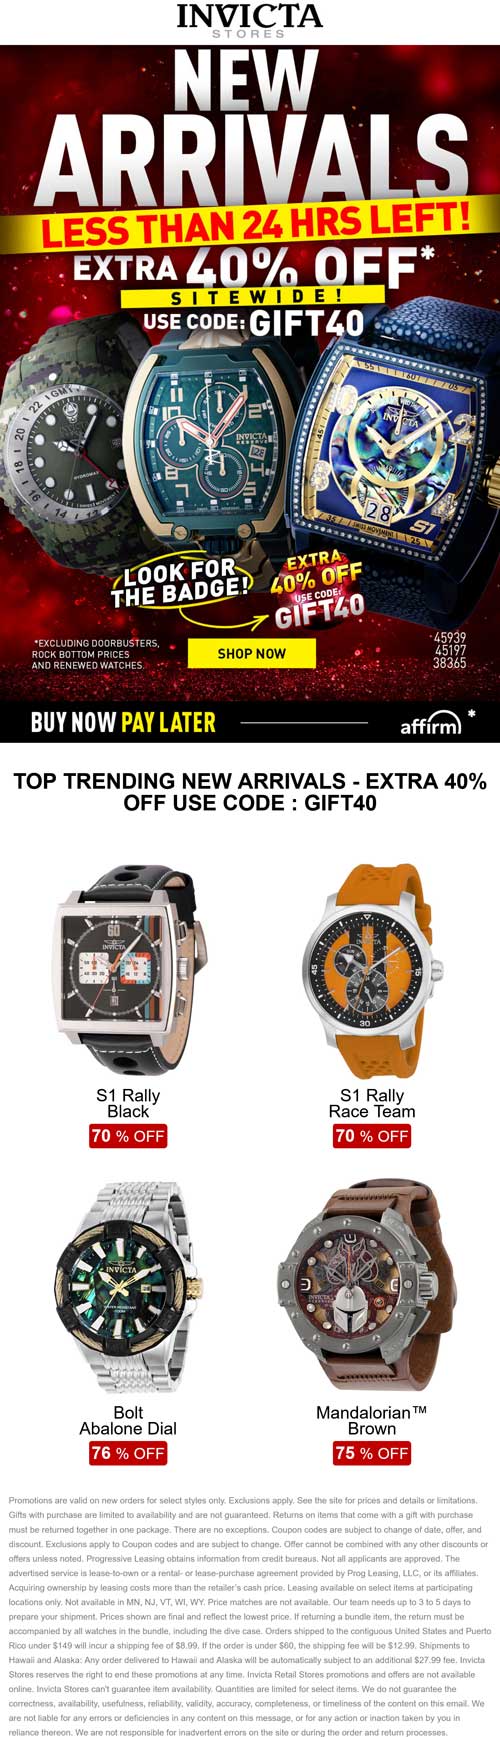 Invicta stores Coupon  Extra 40% off all watches online today at Invicta via promo code GIFT40 #invicta 